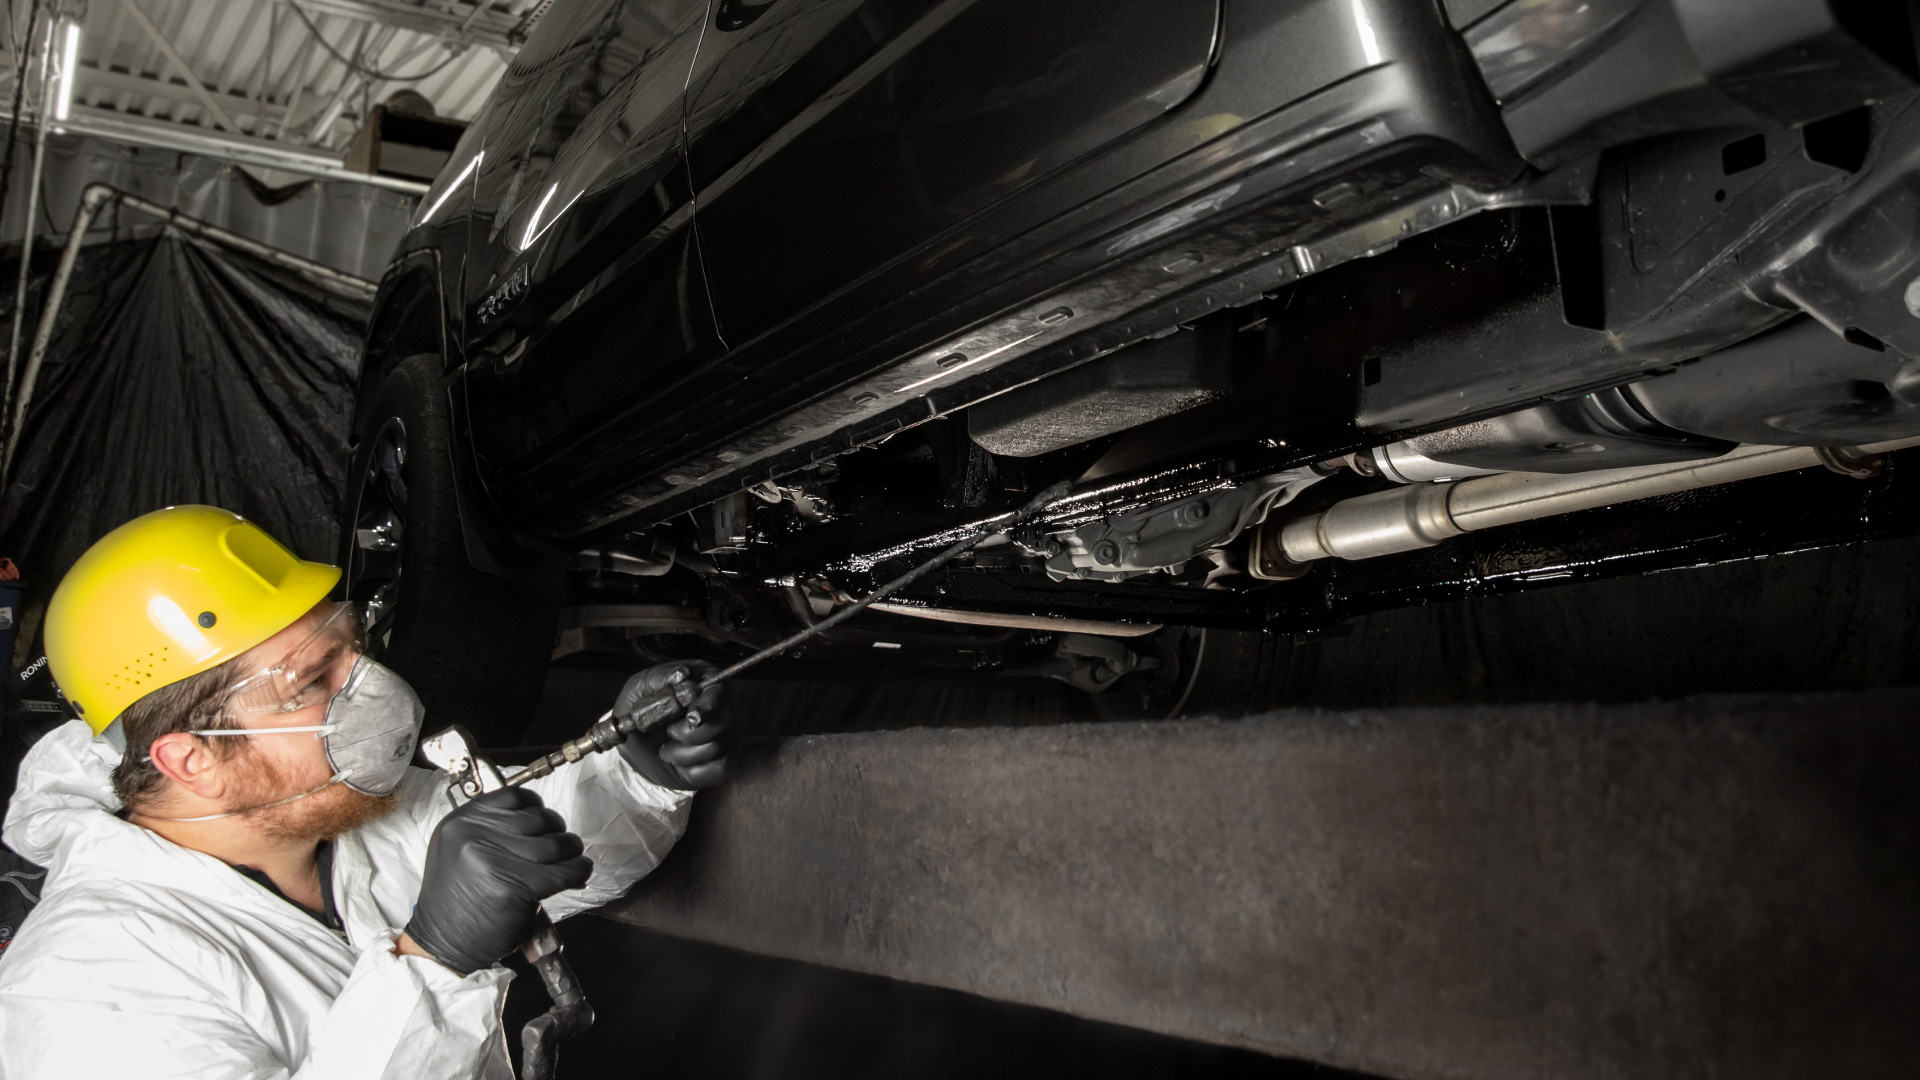 🛻The high-quality BITUMEN SPRAY underbody sealant, the Basecoat and the  GRAVEX SPRAY PREMIUM underbody coating are our three products that will  help you, By Chamäleon GmbH